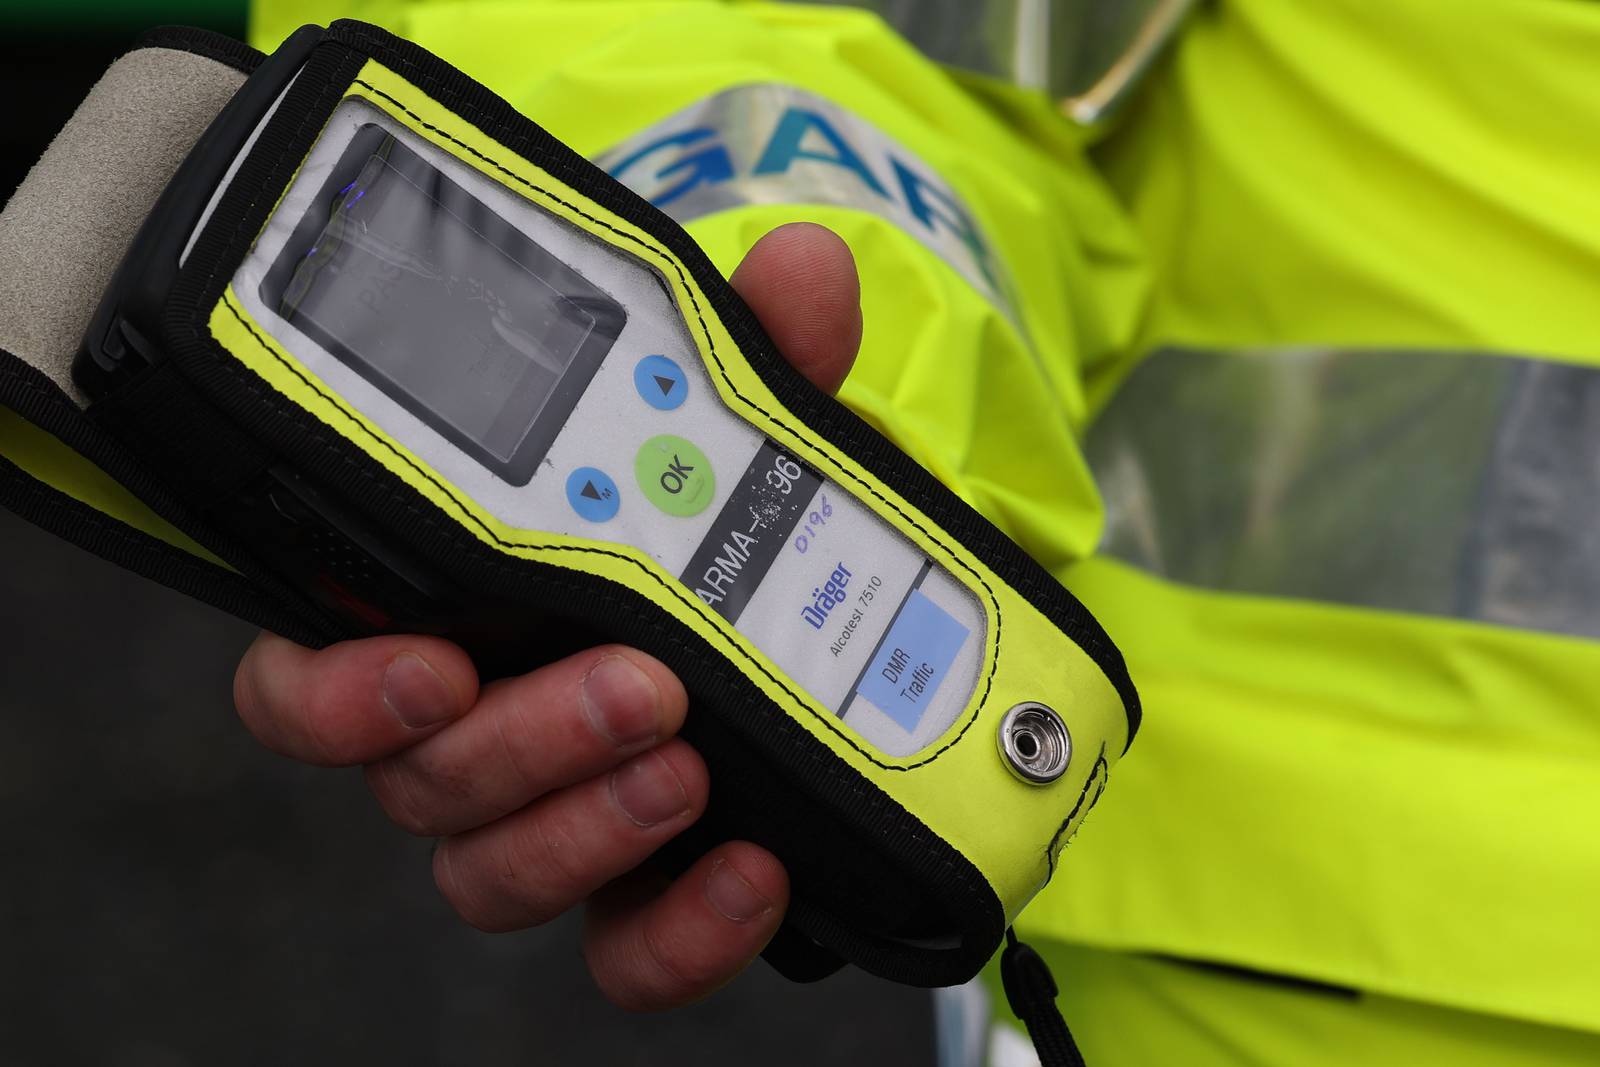 14/03/2022 - NEWS - The Road Safety Authority (RSA) and An Garda Síochána have launched their St. Patrick’s Weekend Bank Holiday road safety appeal. The Drager Alcometer (Breathalyser) the Garda checkpoint on the Chapelizod Road.  Photograph Nick Bradshaw for The Irish Times